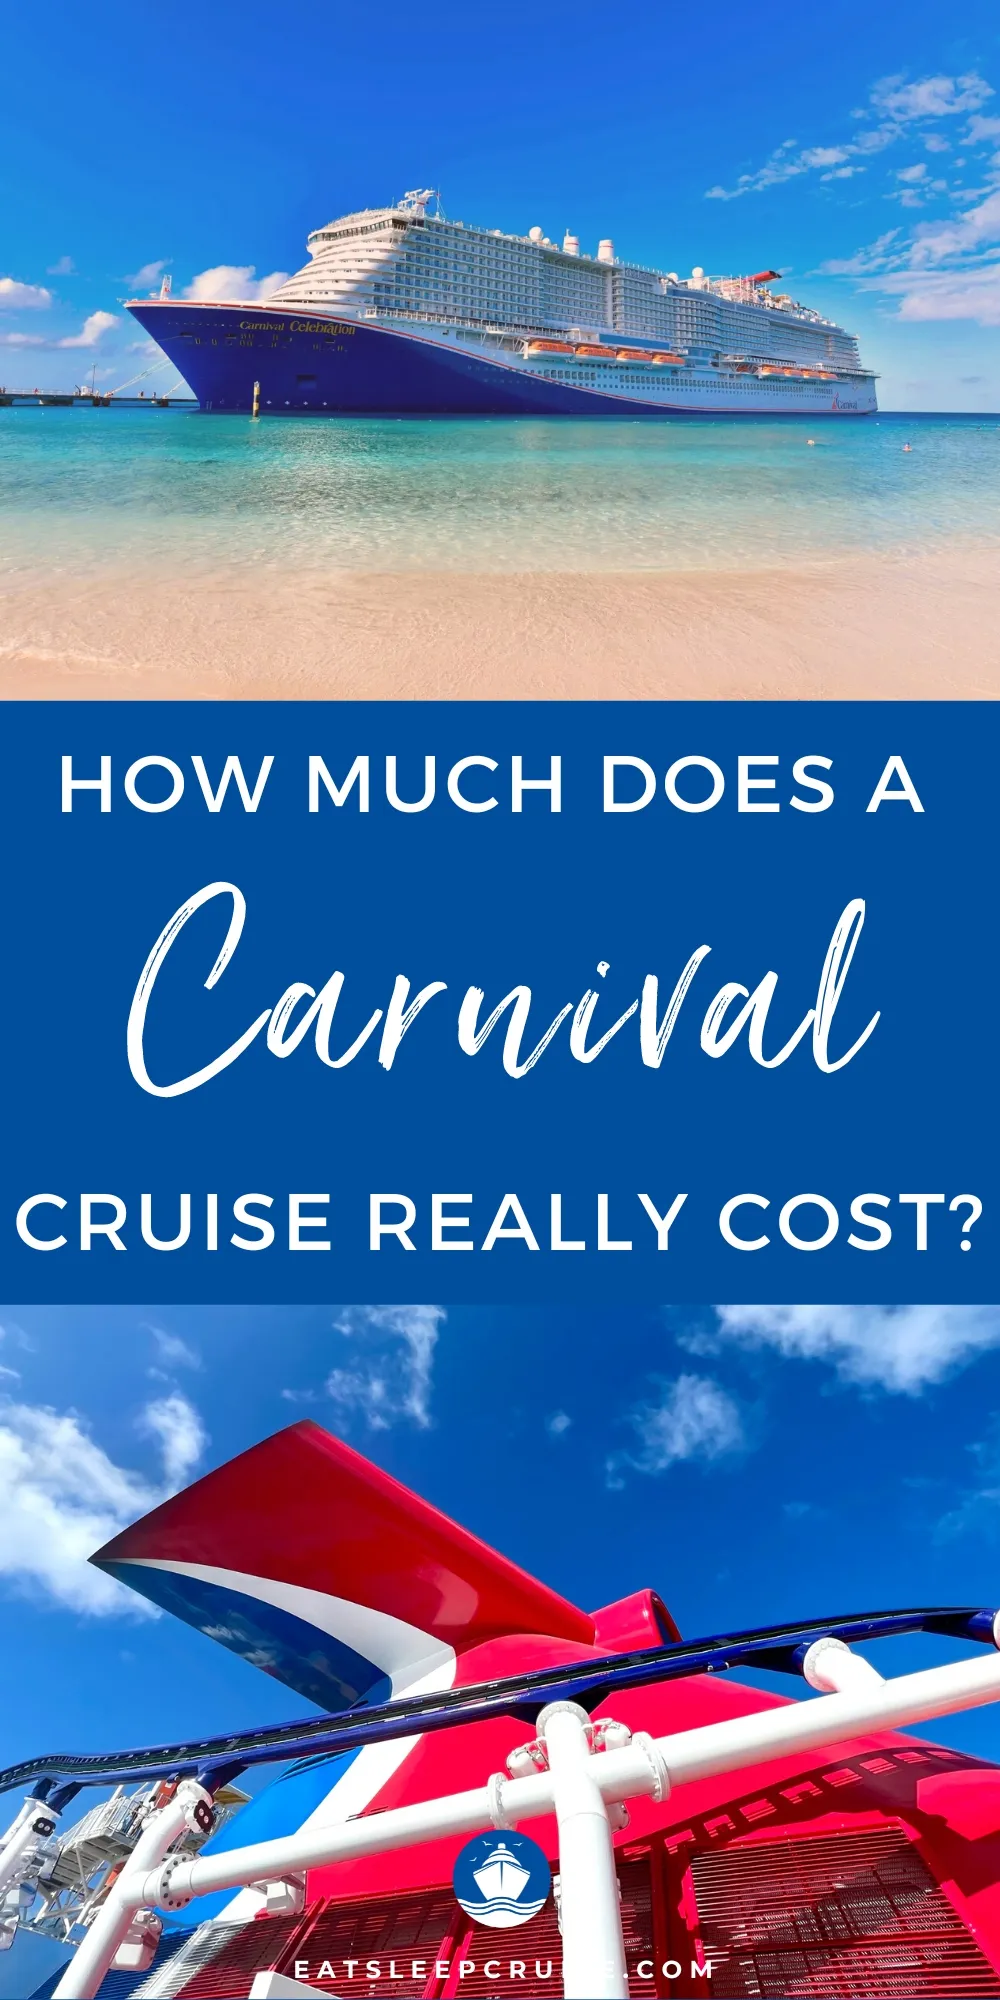 How Much Does a Carnival Cruise Cost?